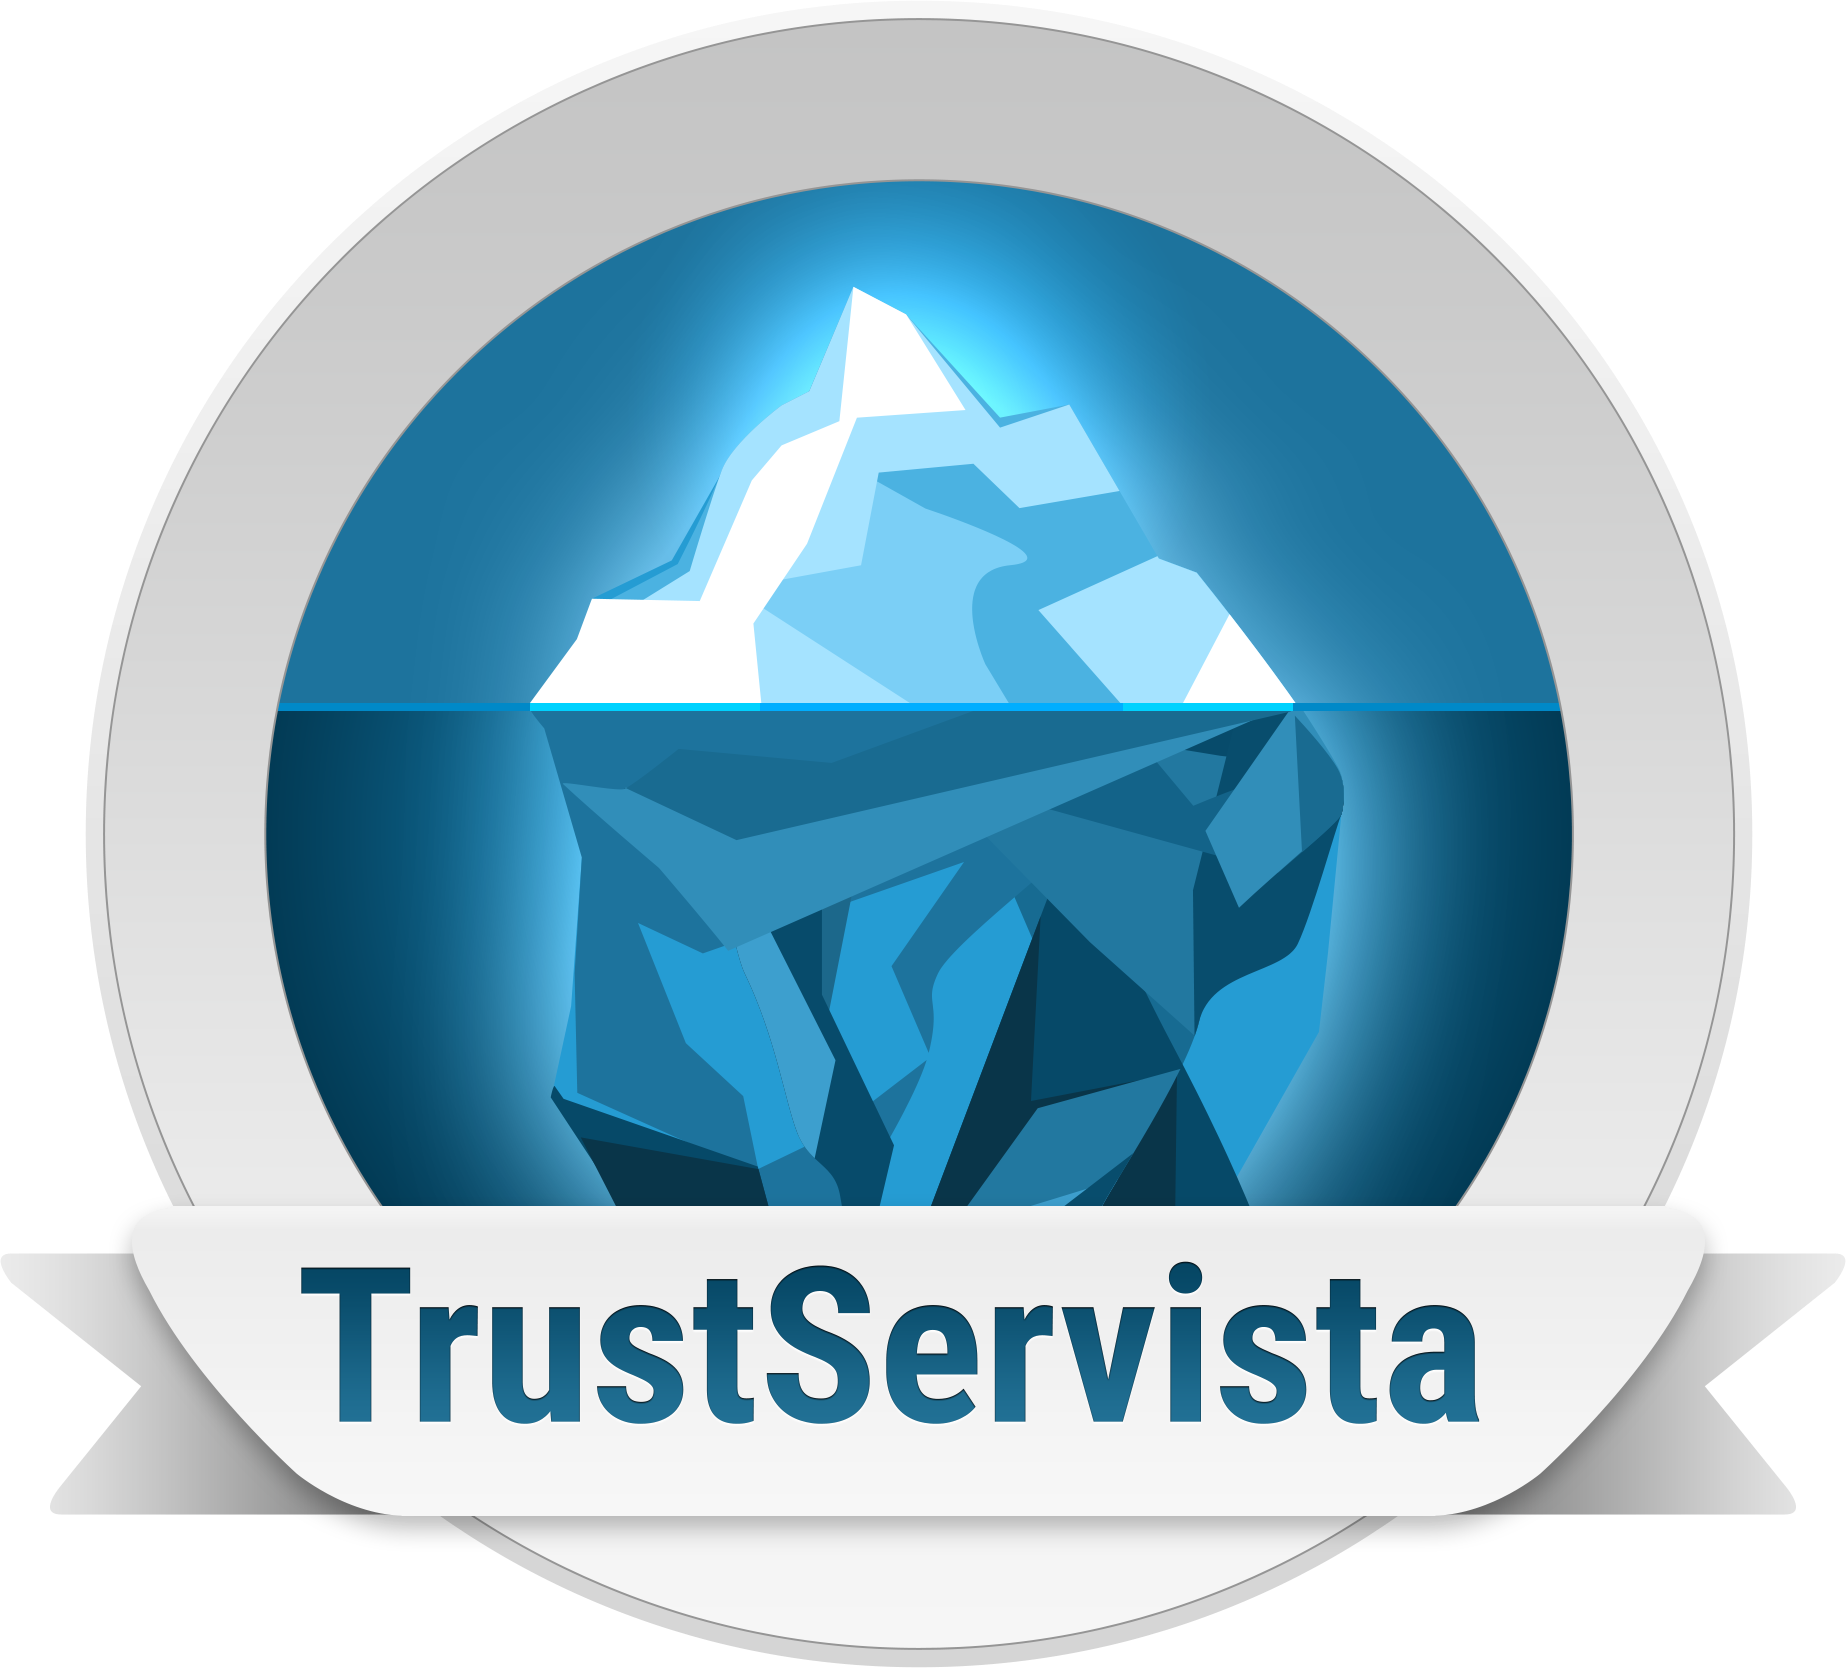 Trustservista Verify The Trustworthiness Of Any News Article In